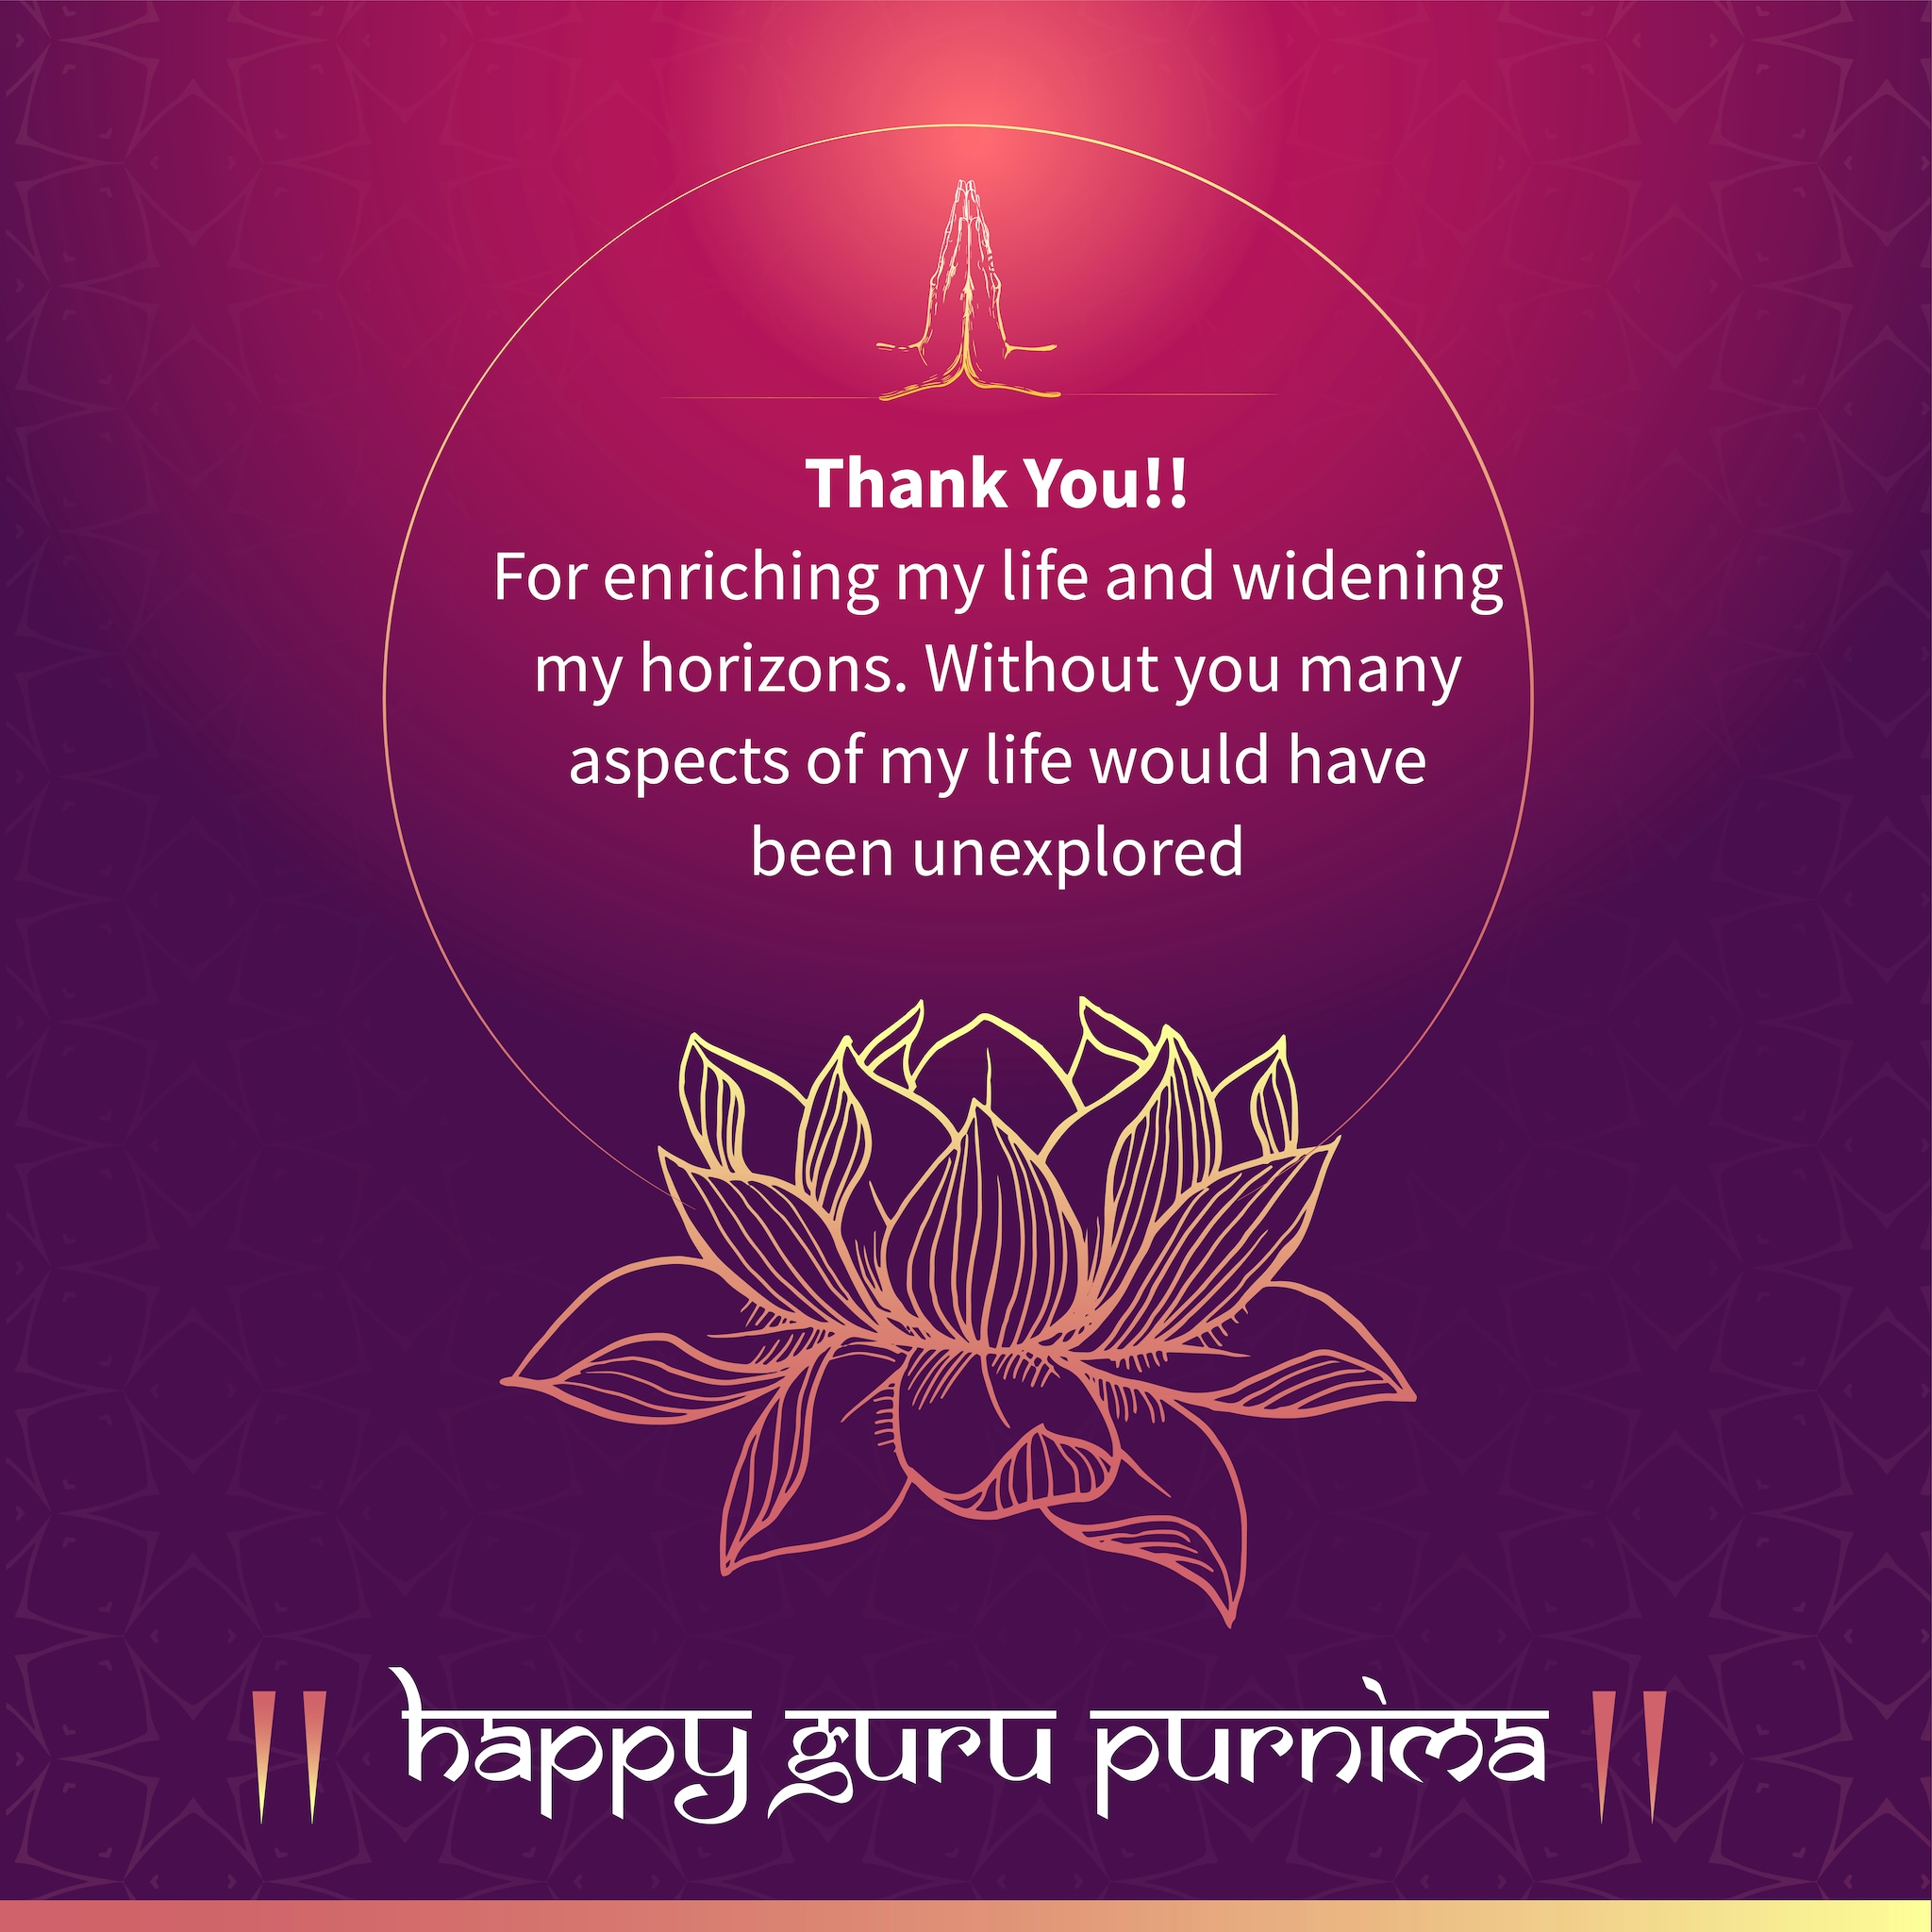 Happy Guru Purnima 2022: Images, Wishes, Quotes, Messages and WhatsApp Wishes to share.  (Image: Shutterstock)